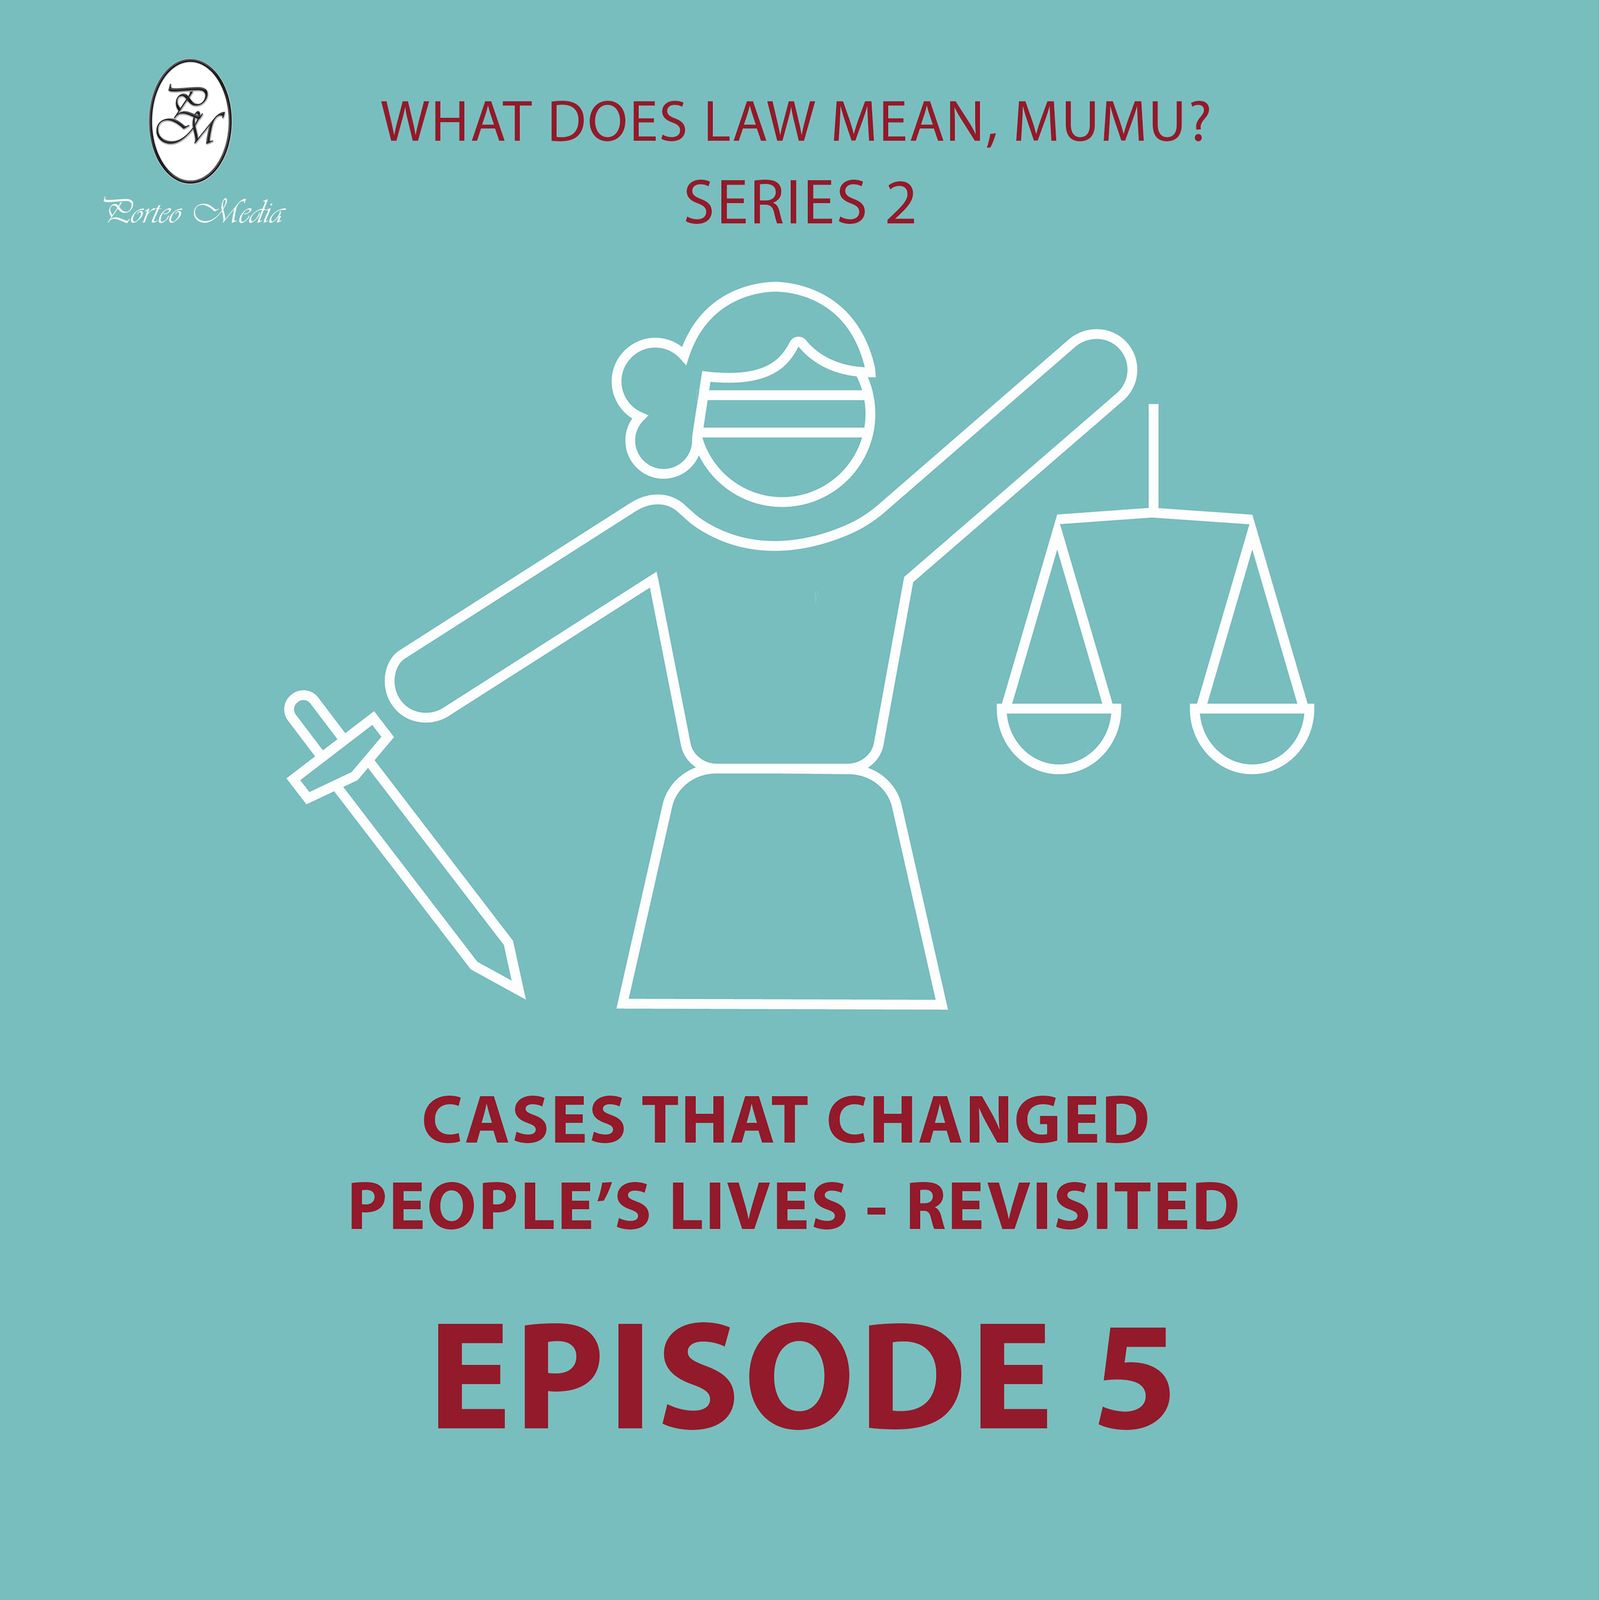 S2 Ep2: Episode 5. Cases That Changed People's Lives - Revisited: "The State (Healy) v O'Donoghue".